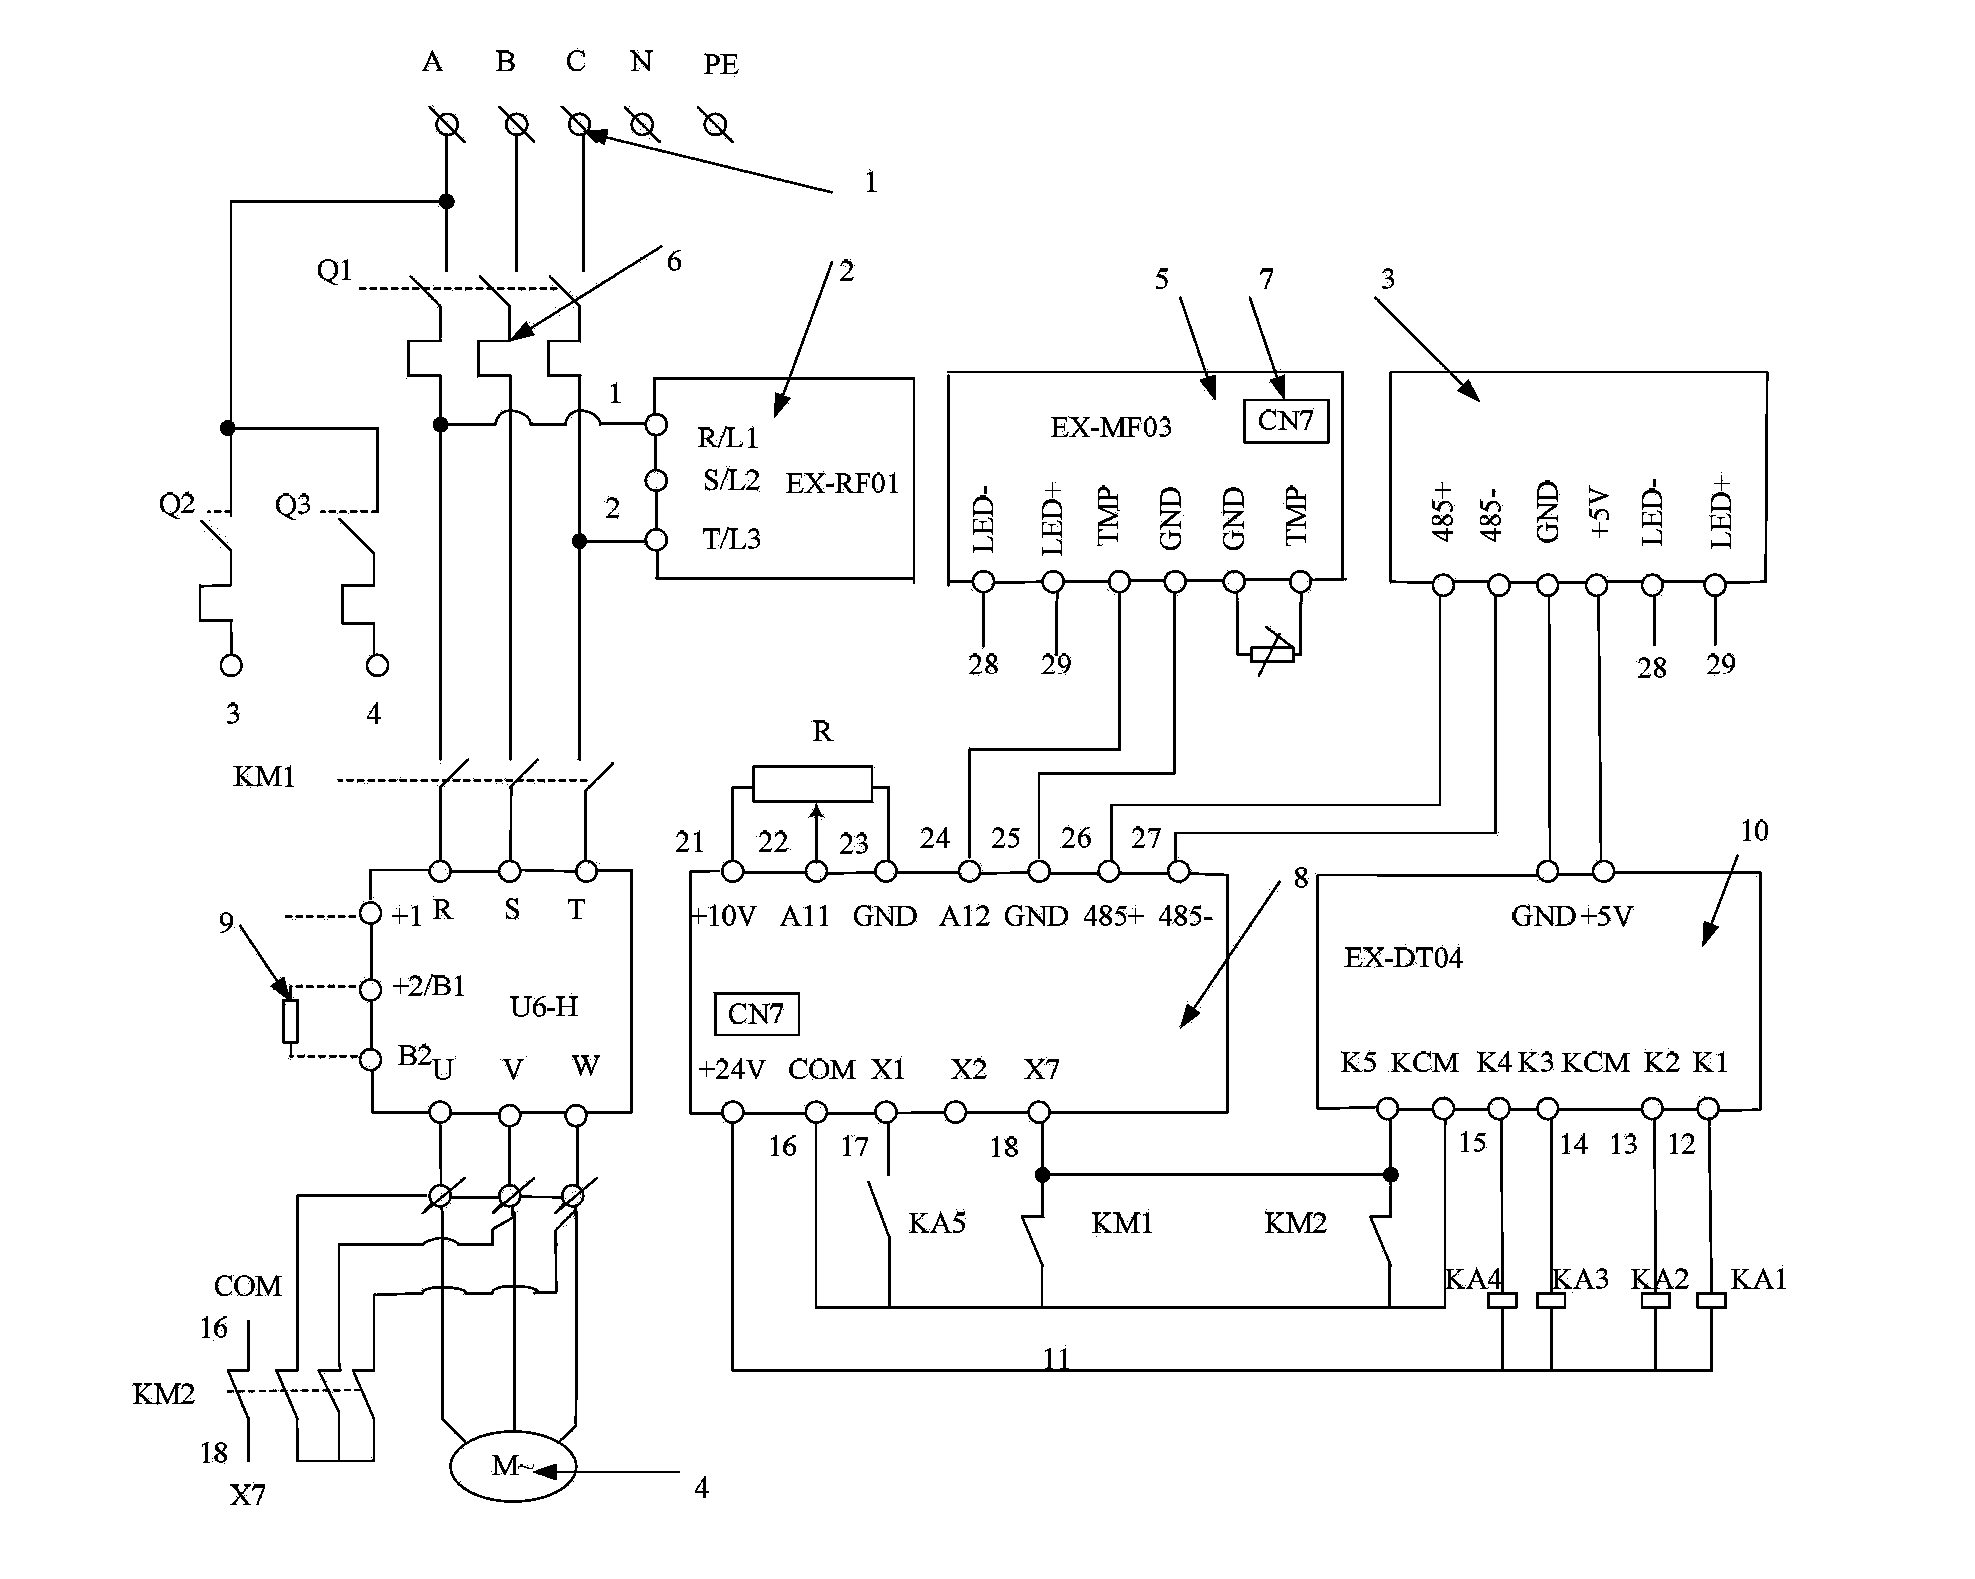 Control system for permanent magnet synchronous motor